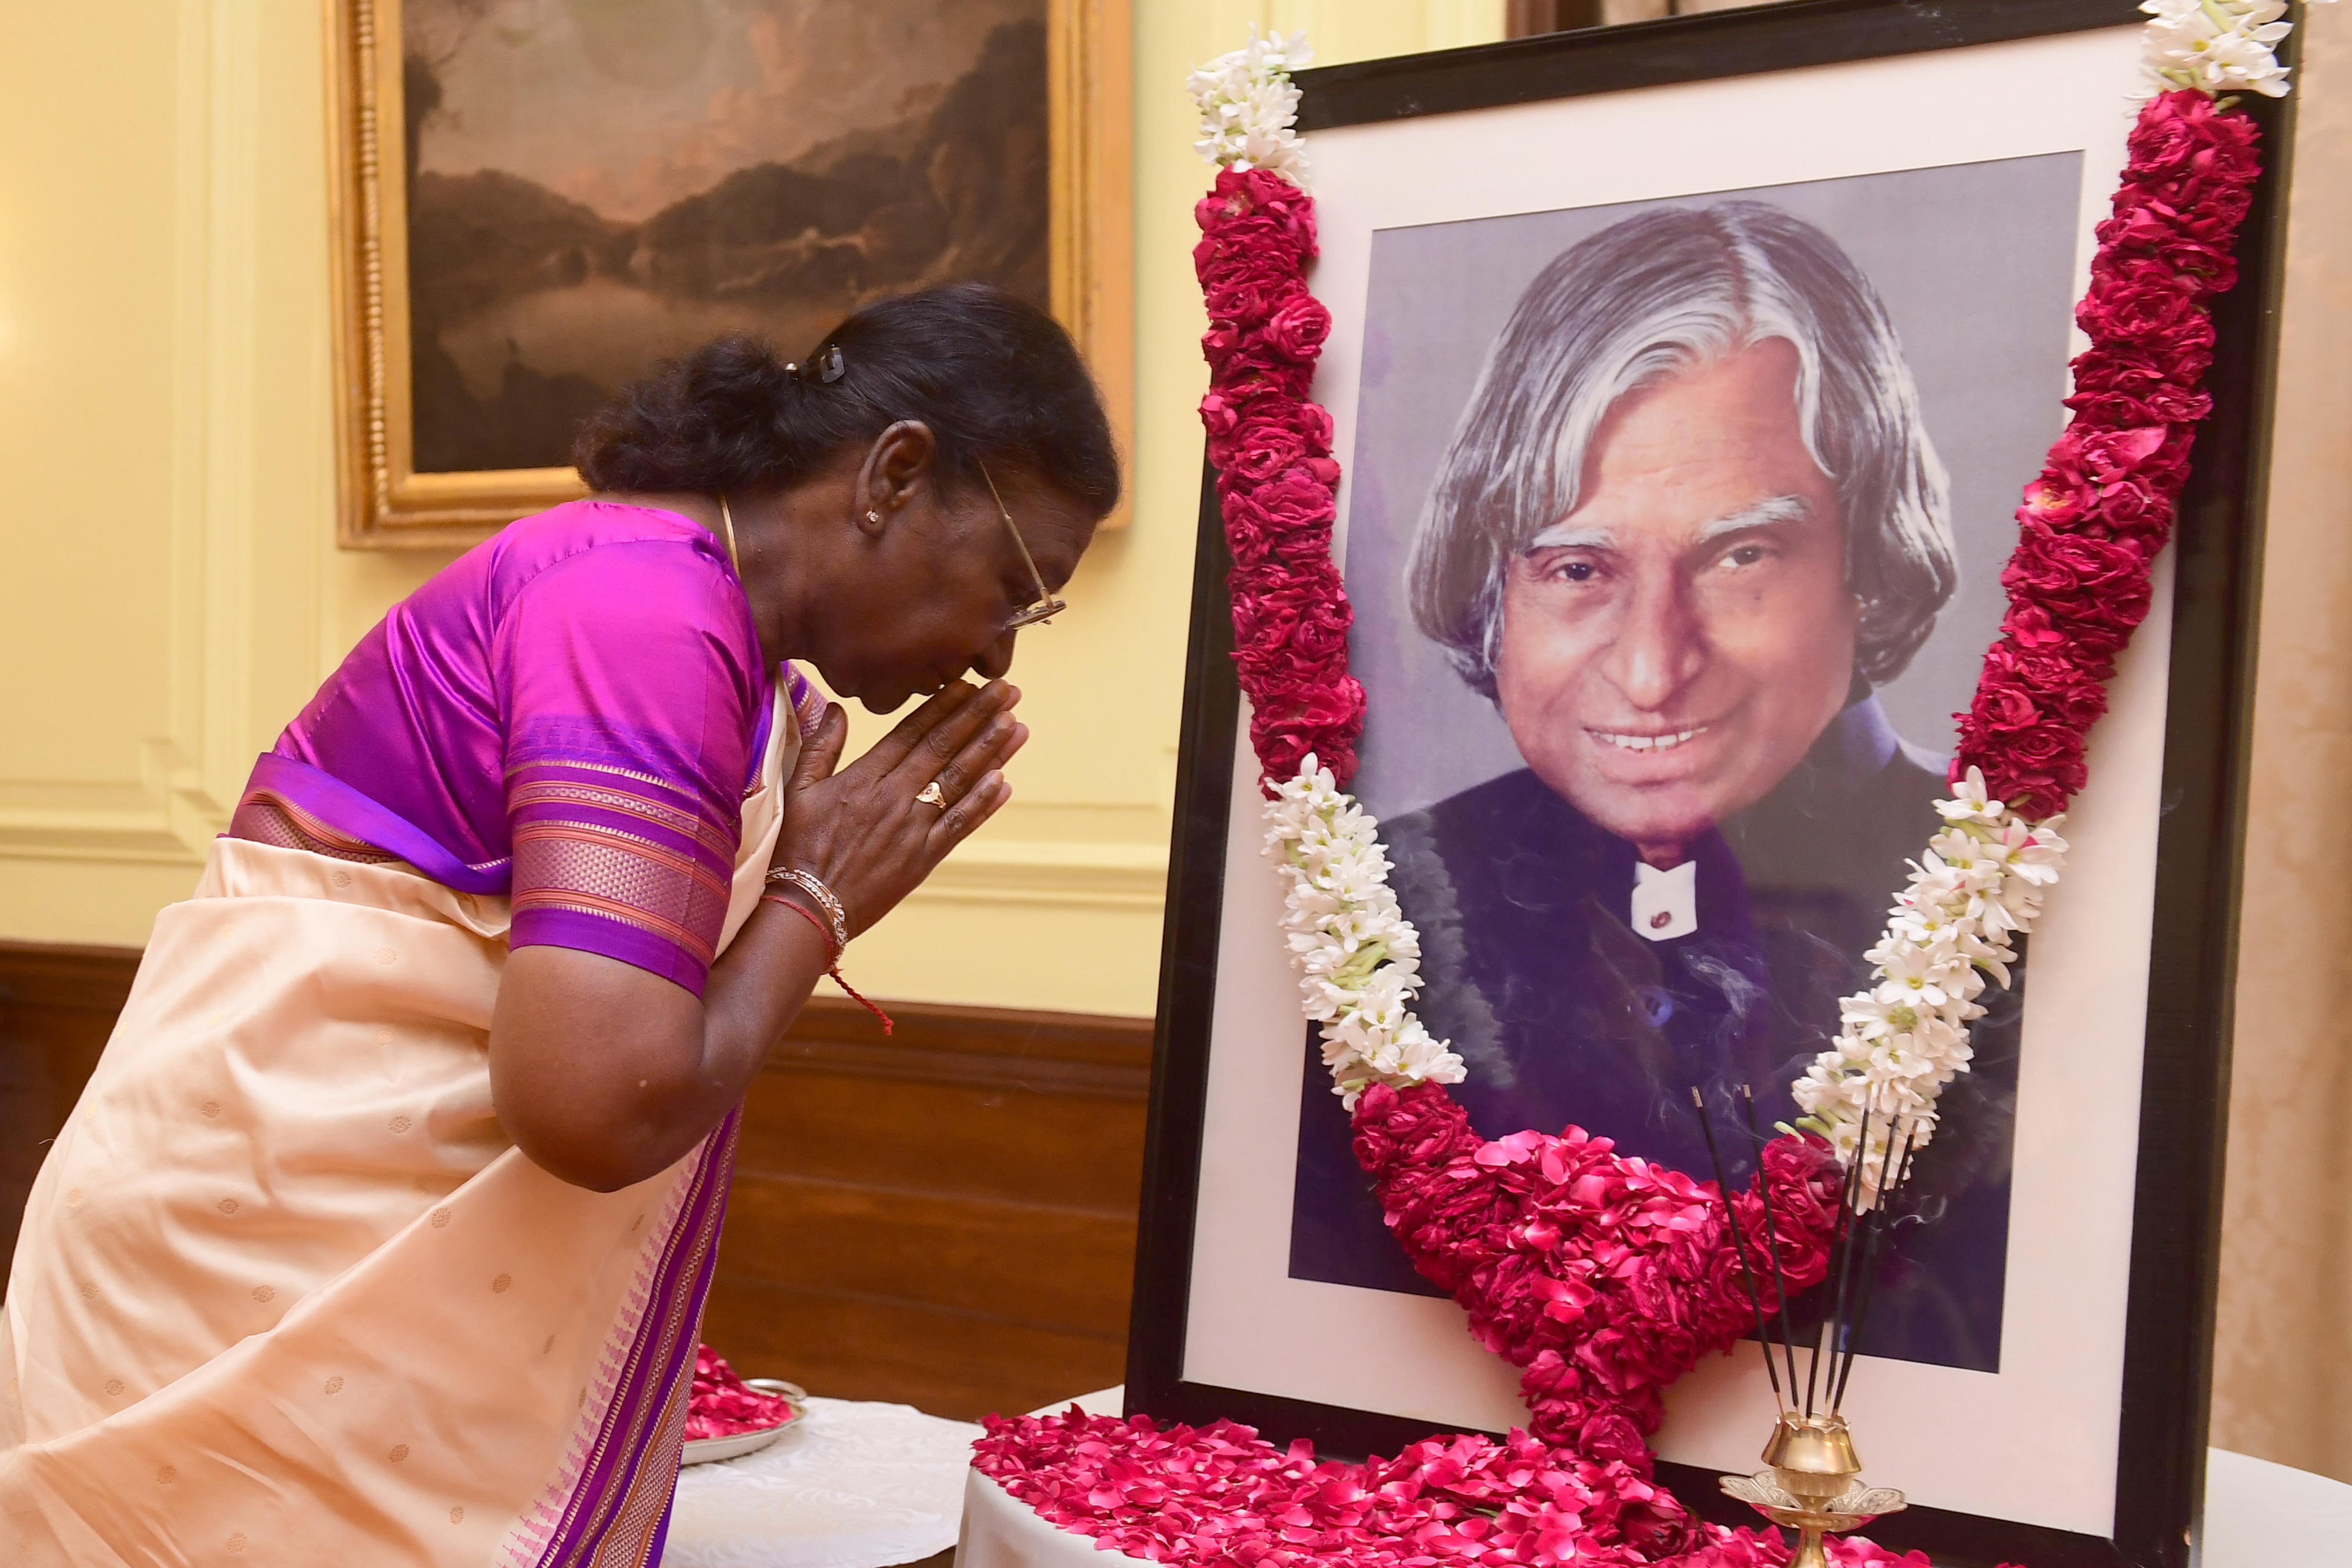 PRESIDENT OF INDIA PAYS HOMAGE TO DR APJ ABDUL KALAM ON HIS BIRTH ANNIVERSARY